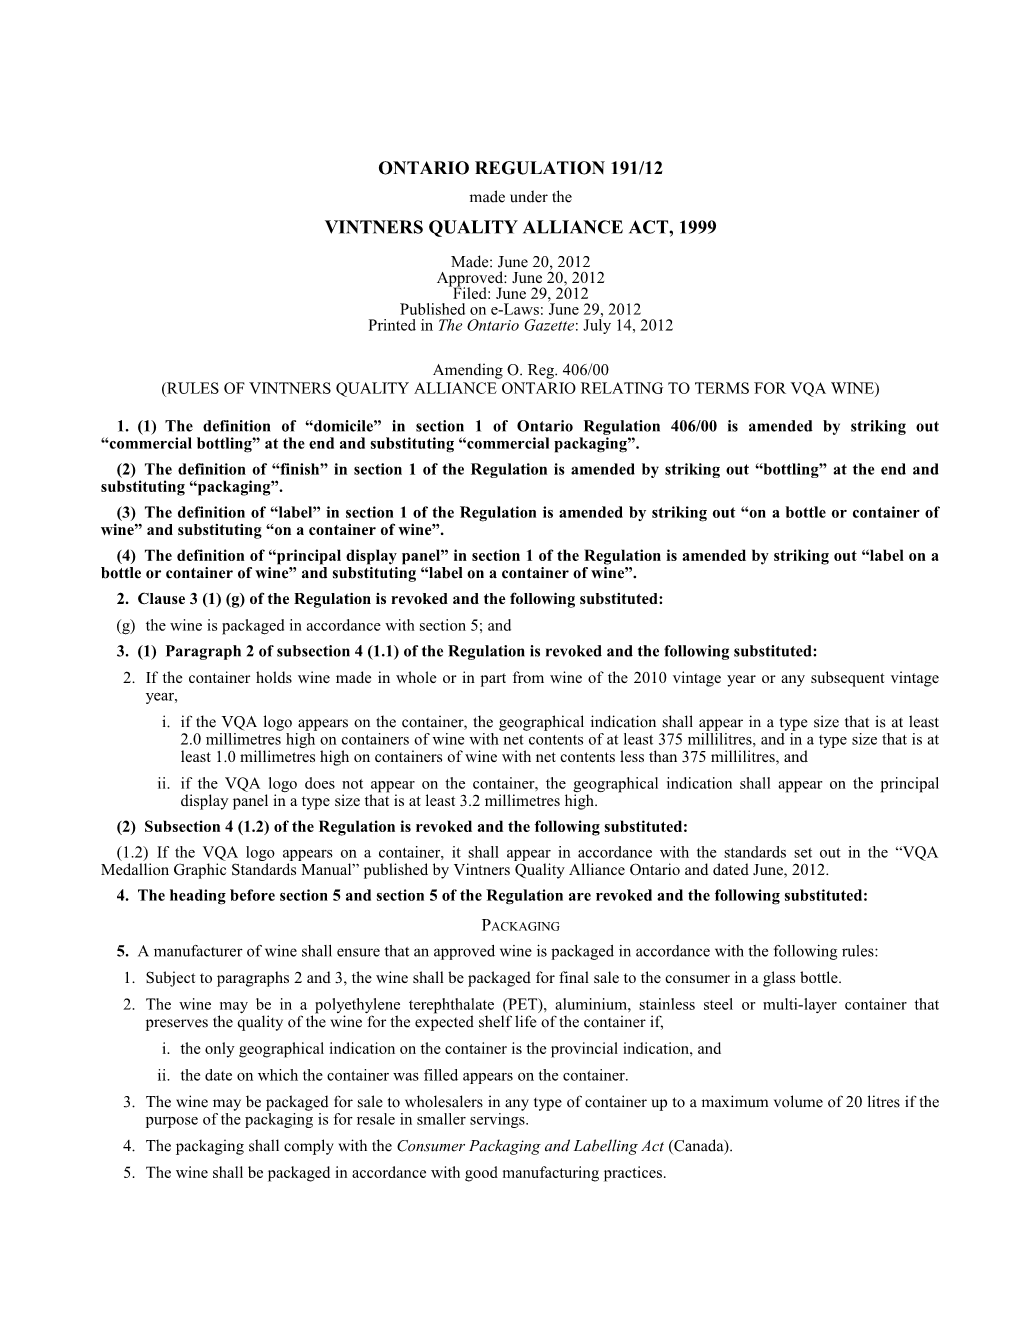 VINTNERS QUALITY ALLIANCE ACT, 1999 - O. Reg. 191/12